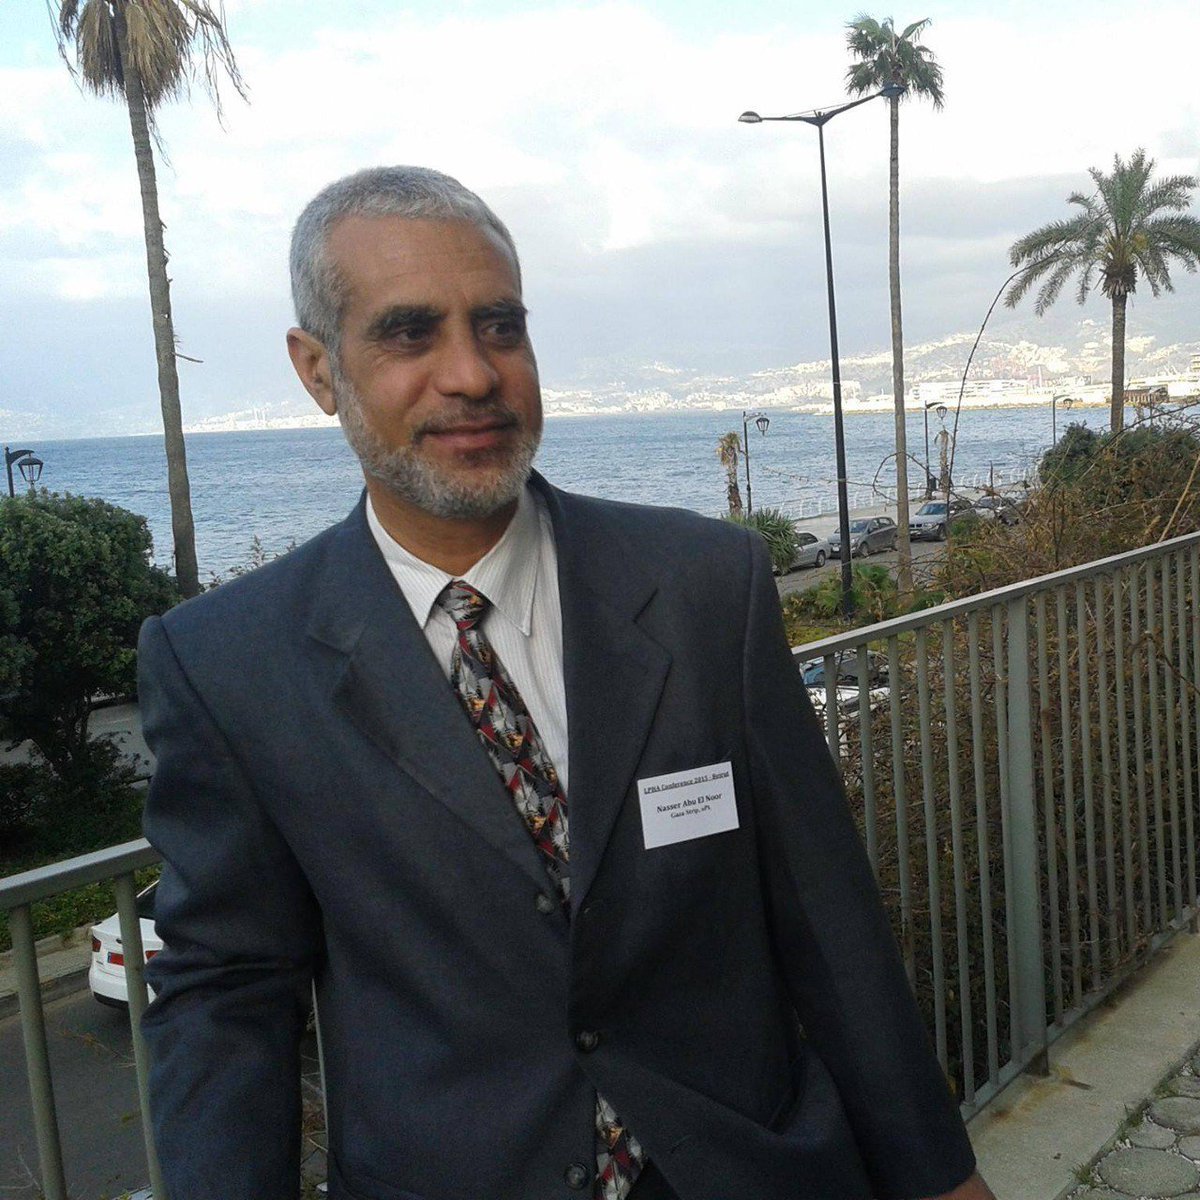 Professor Nasser Abu Al-Nour, Dean of the Faculty of Nursing at the Islamic University of Gaza, was killed in an Israeli airstrike along with 7 members of his family.